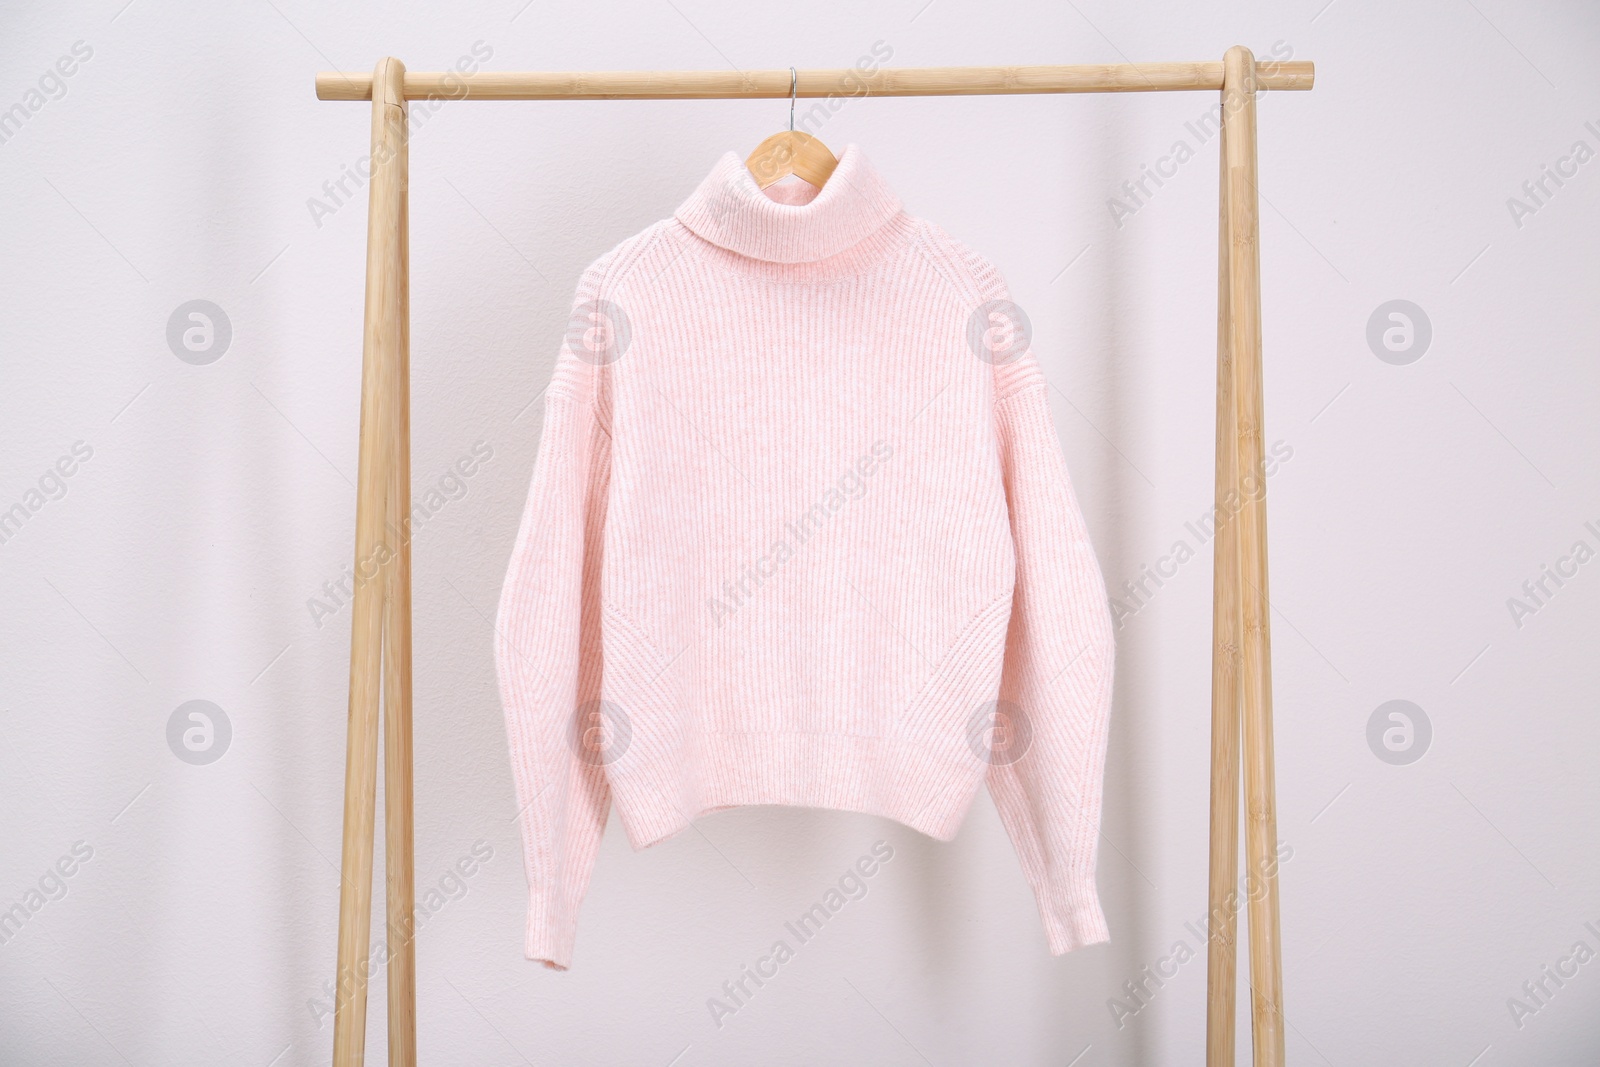 Photo of Stylish knitted sweater hanging on clothing rack near light wall